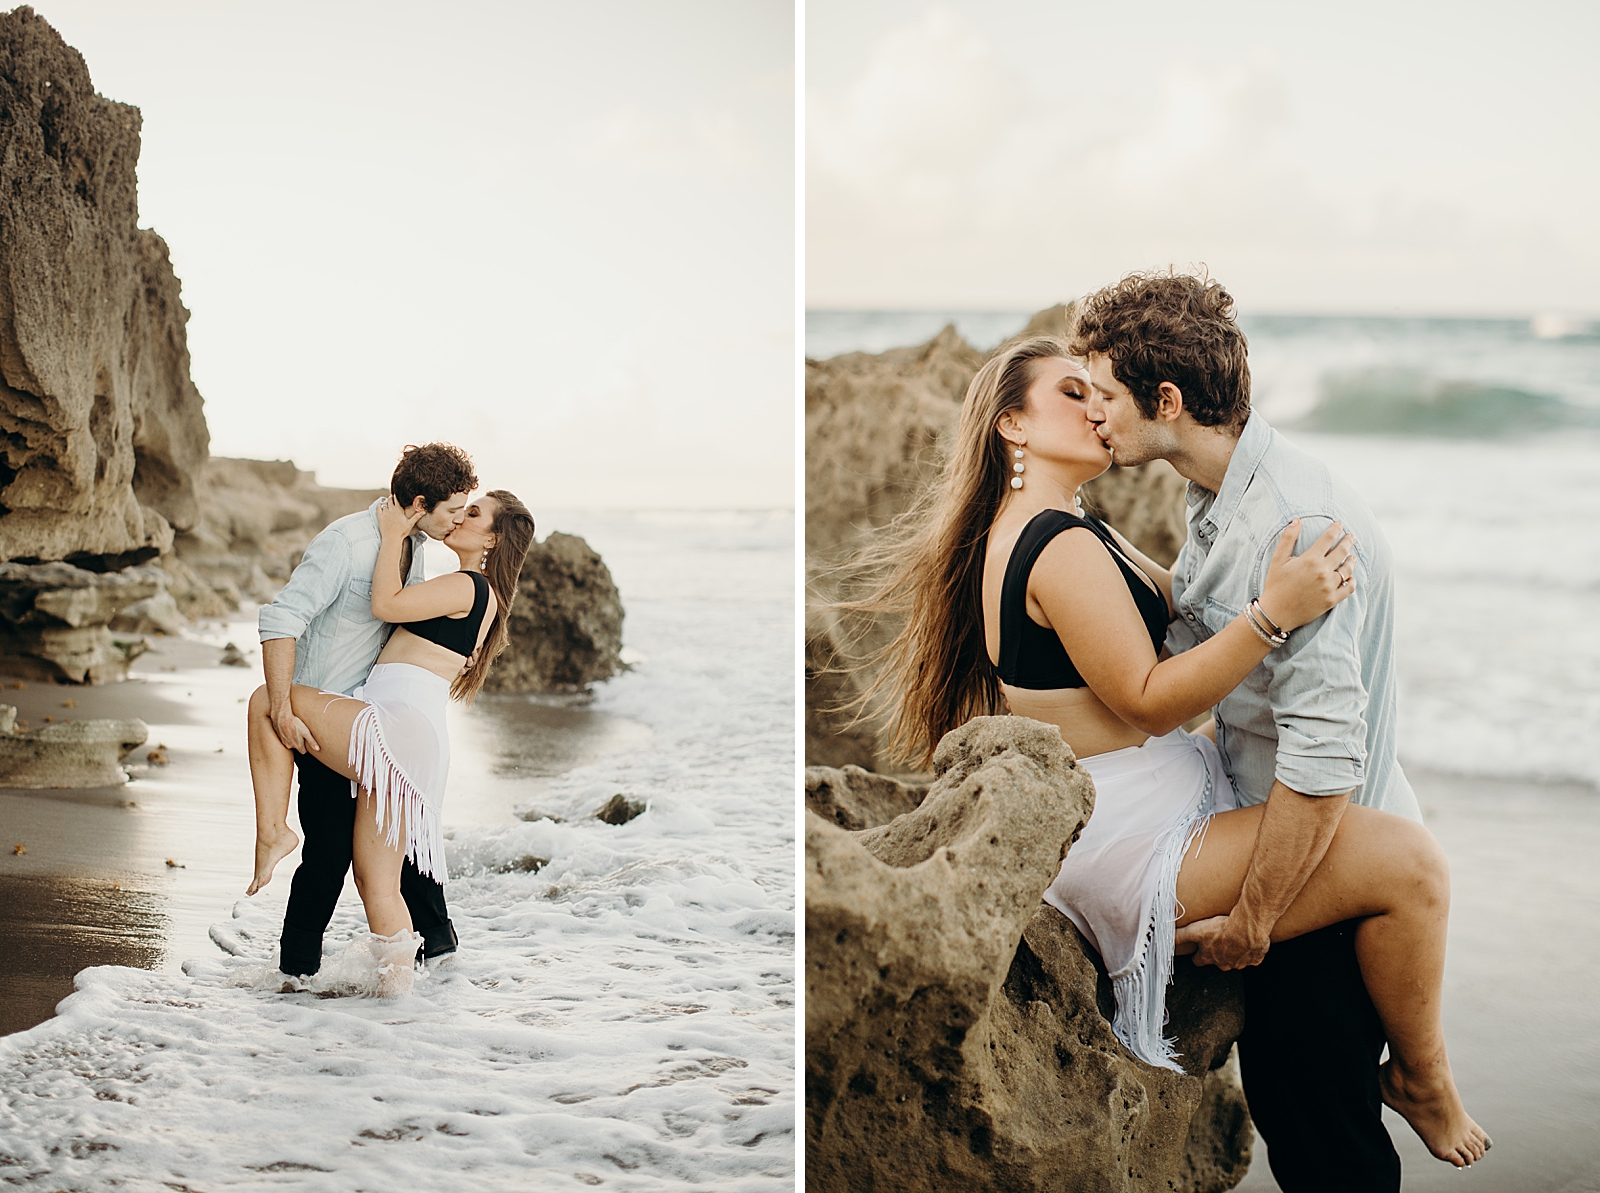 Couple kissing on the beach shoreline and leaning against naturally formed beach rock